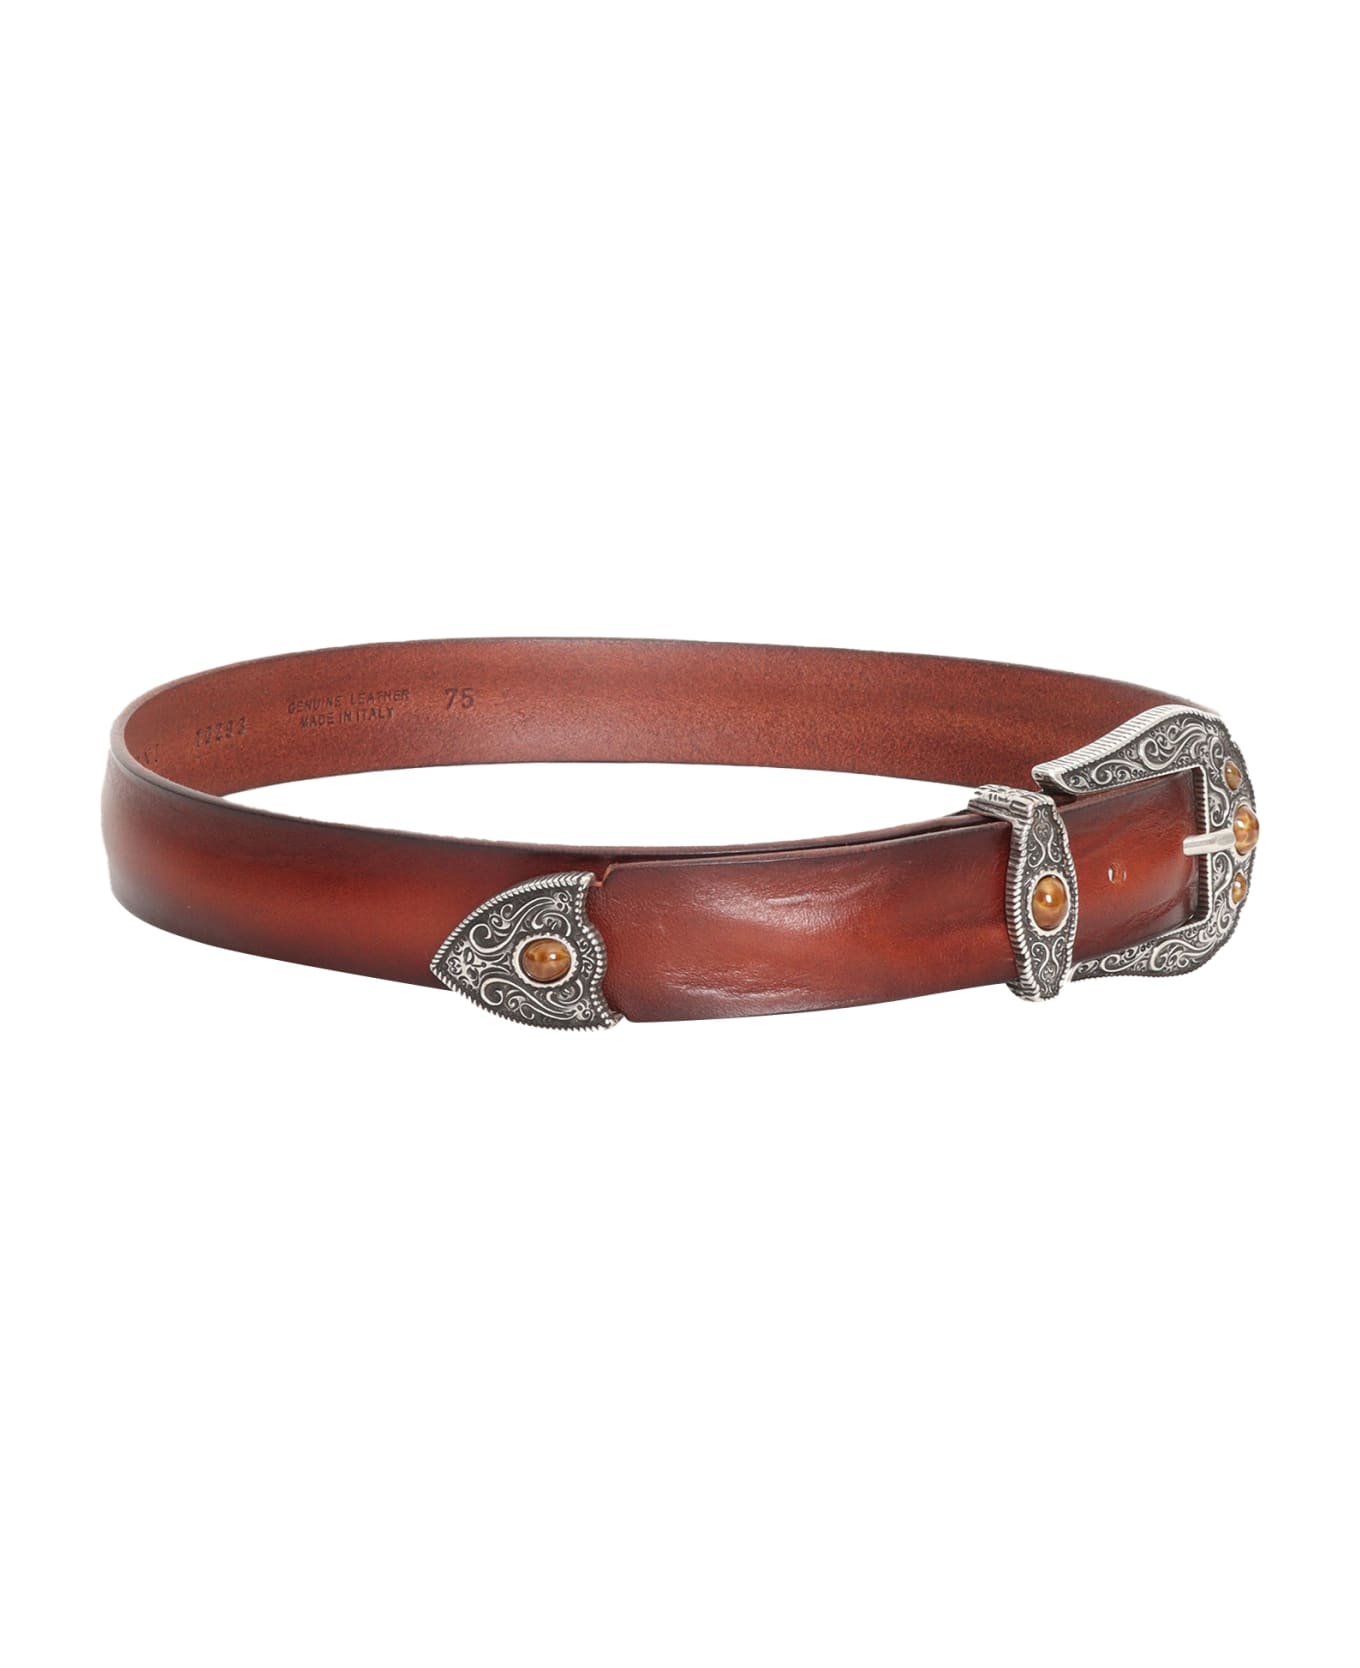 Orciani Texan Style Belt - BROWN